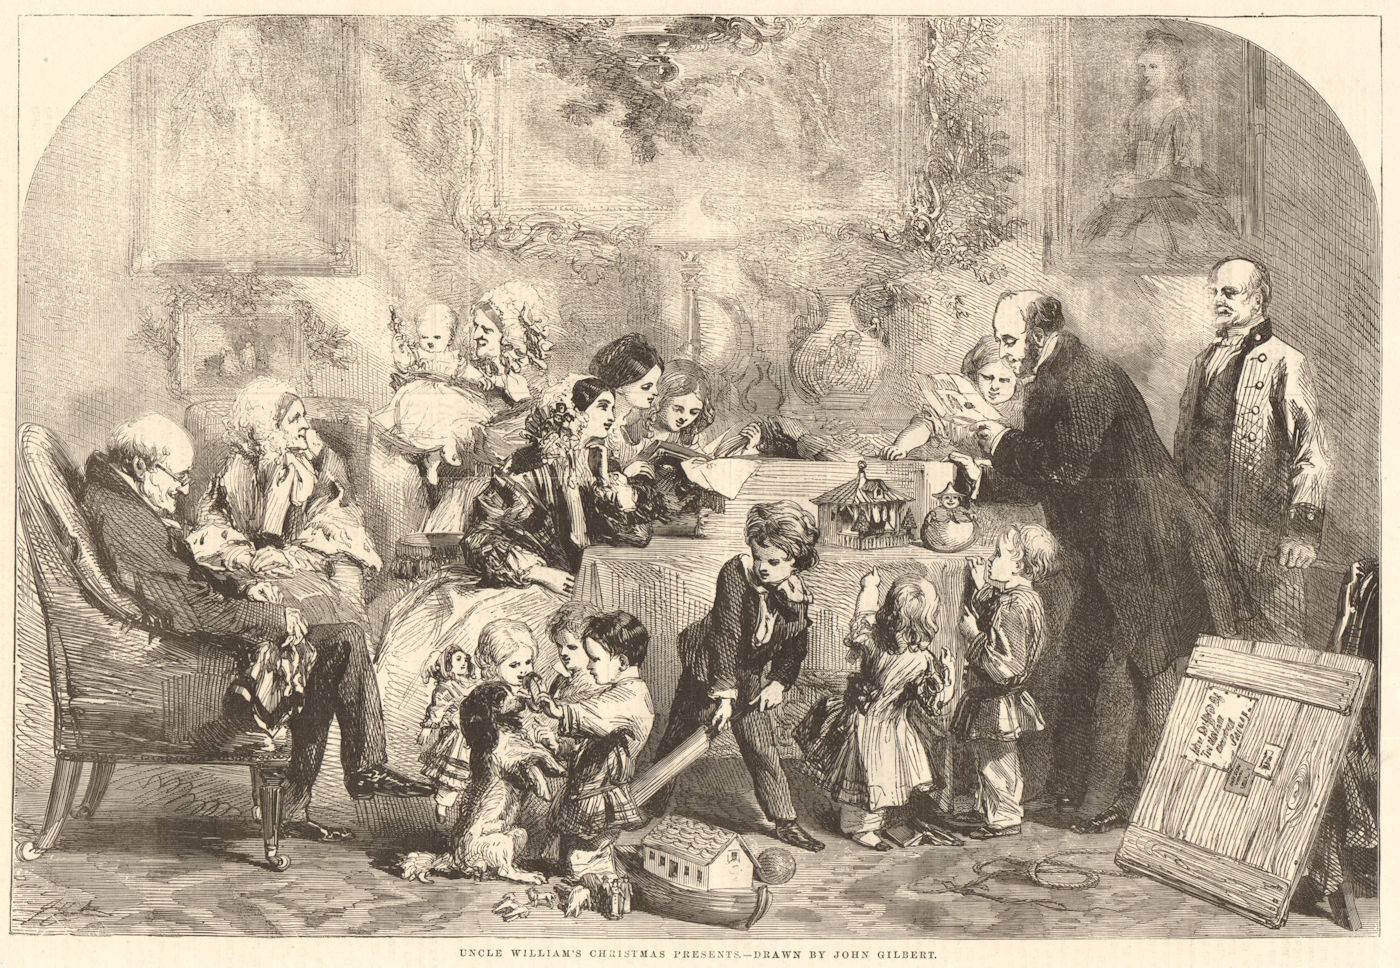 Associate Product Uncle William's Christmas presents - drawn by John Gilbert. Family 1856